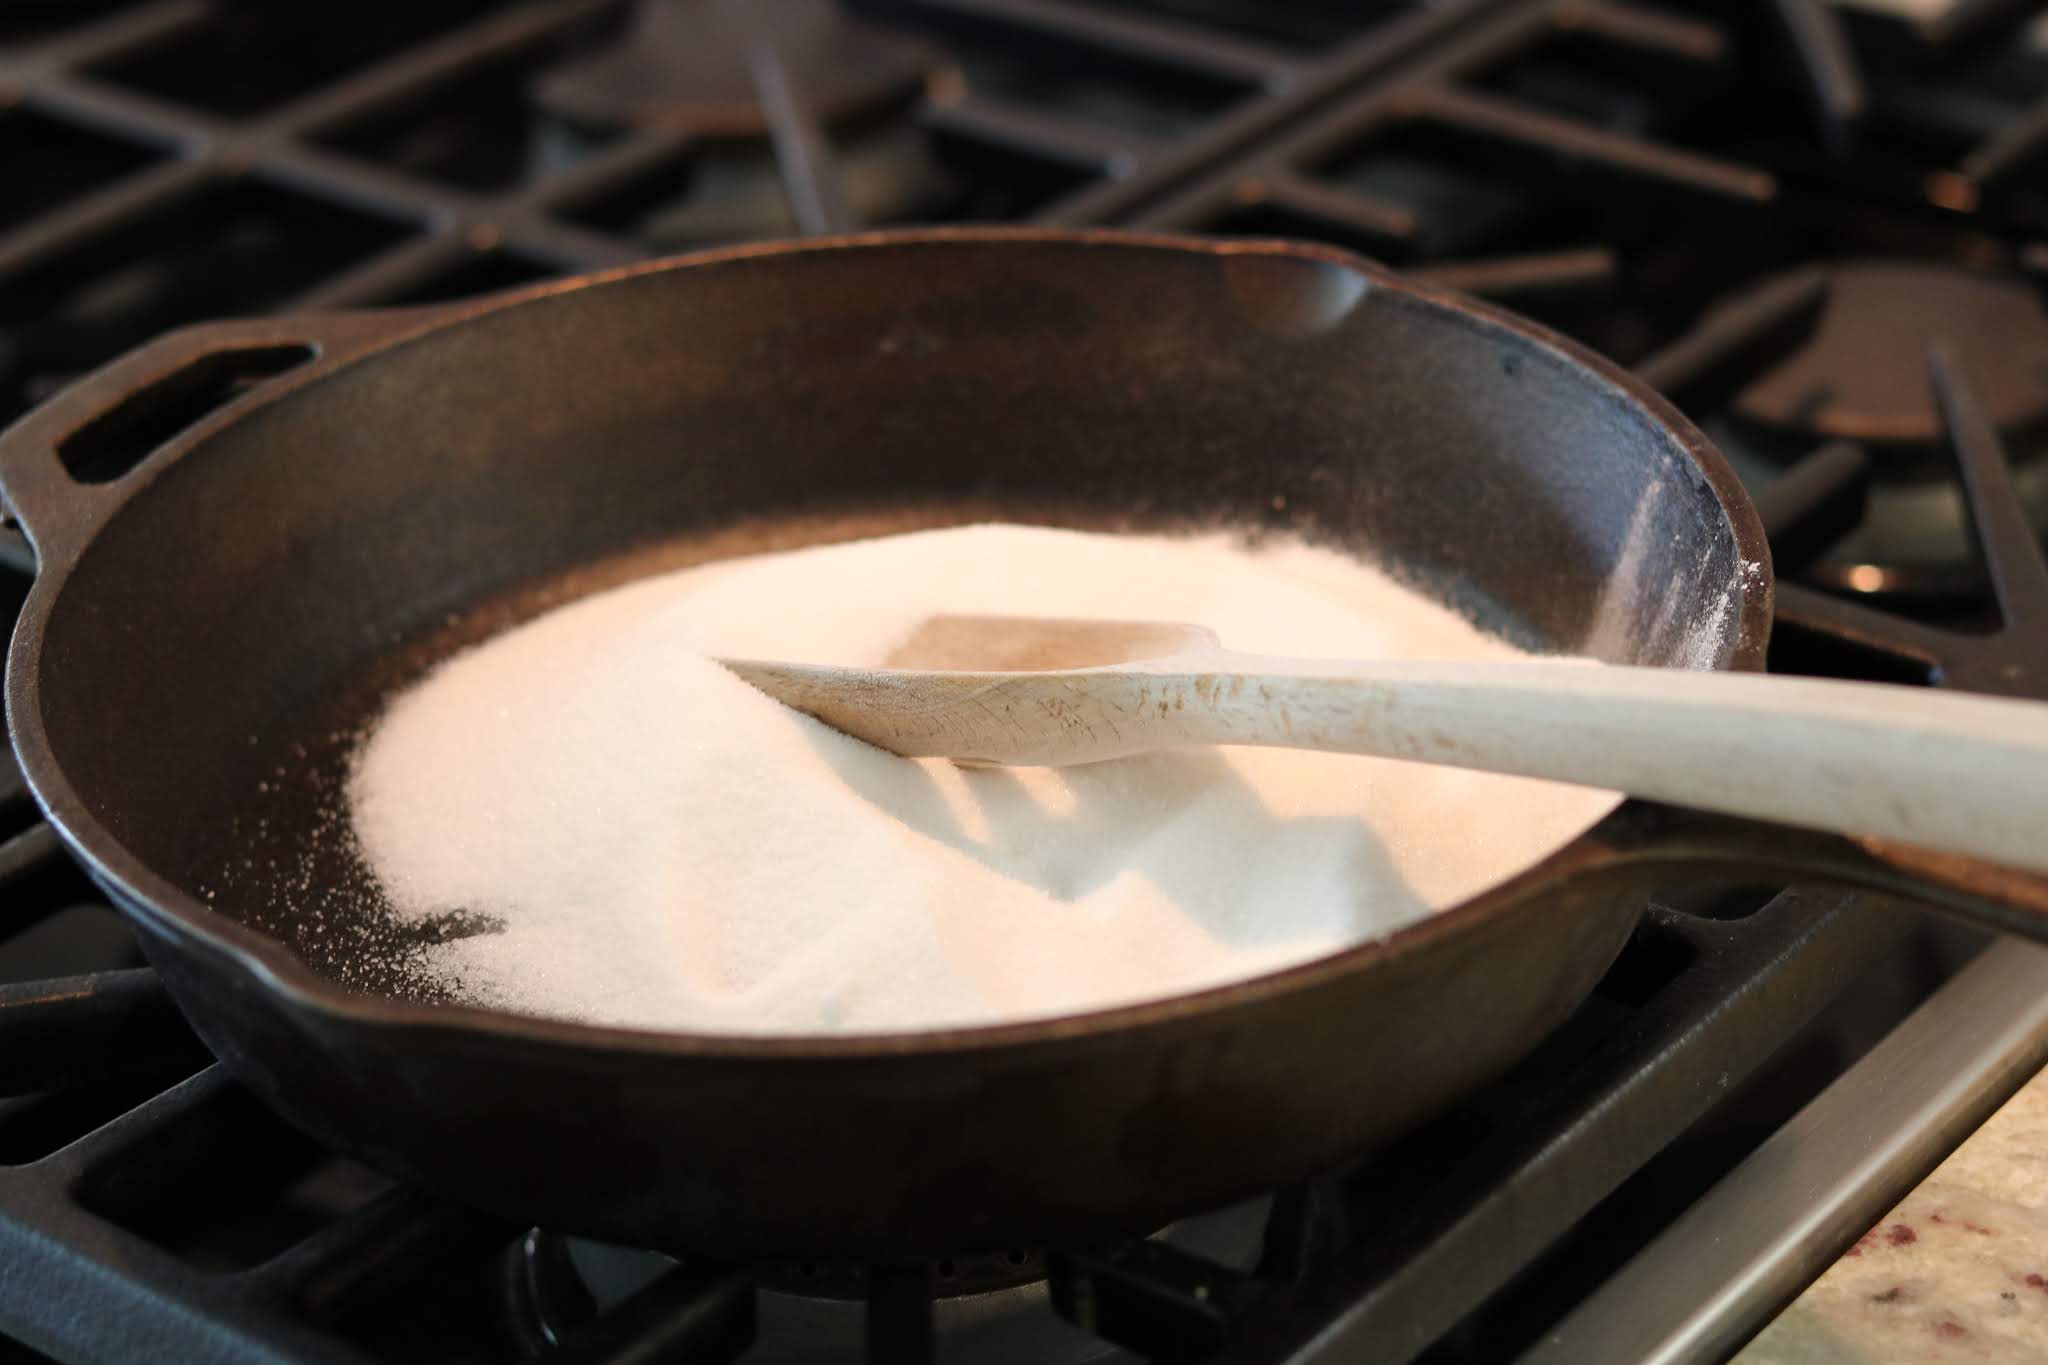 frosting-icing-cast-iron-skillet-caramel-homemade